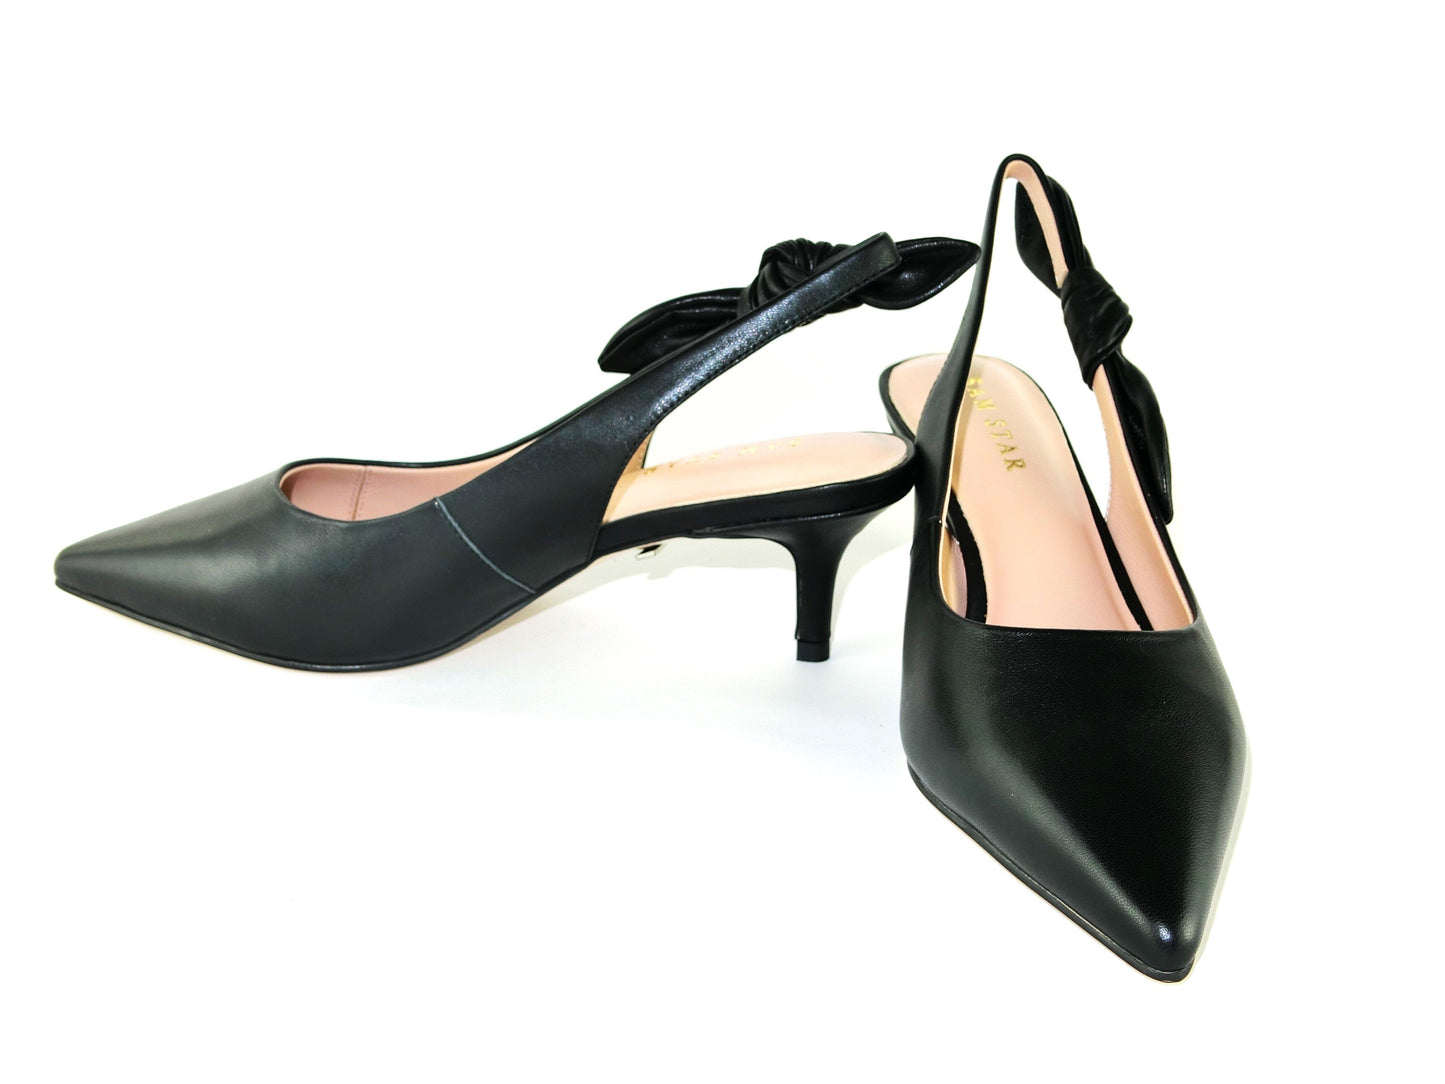 SS23006 Leather court shoes with sling back design (removable bow) Black and Beige ladies shoes Sam Star shoes Black 36/3 